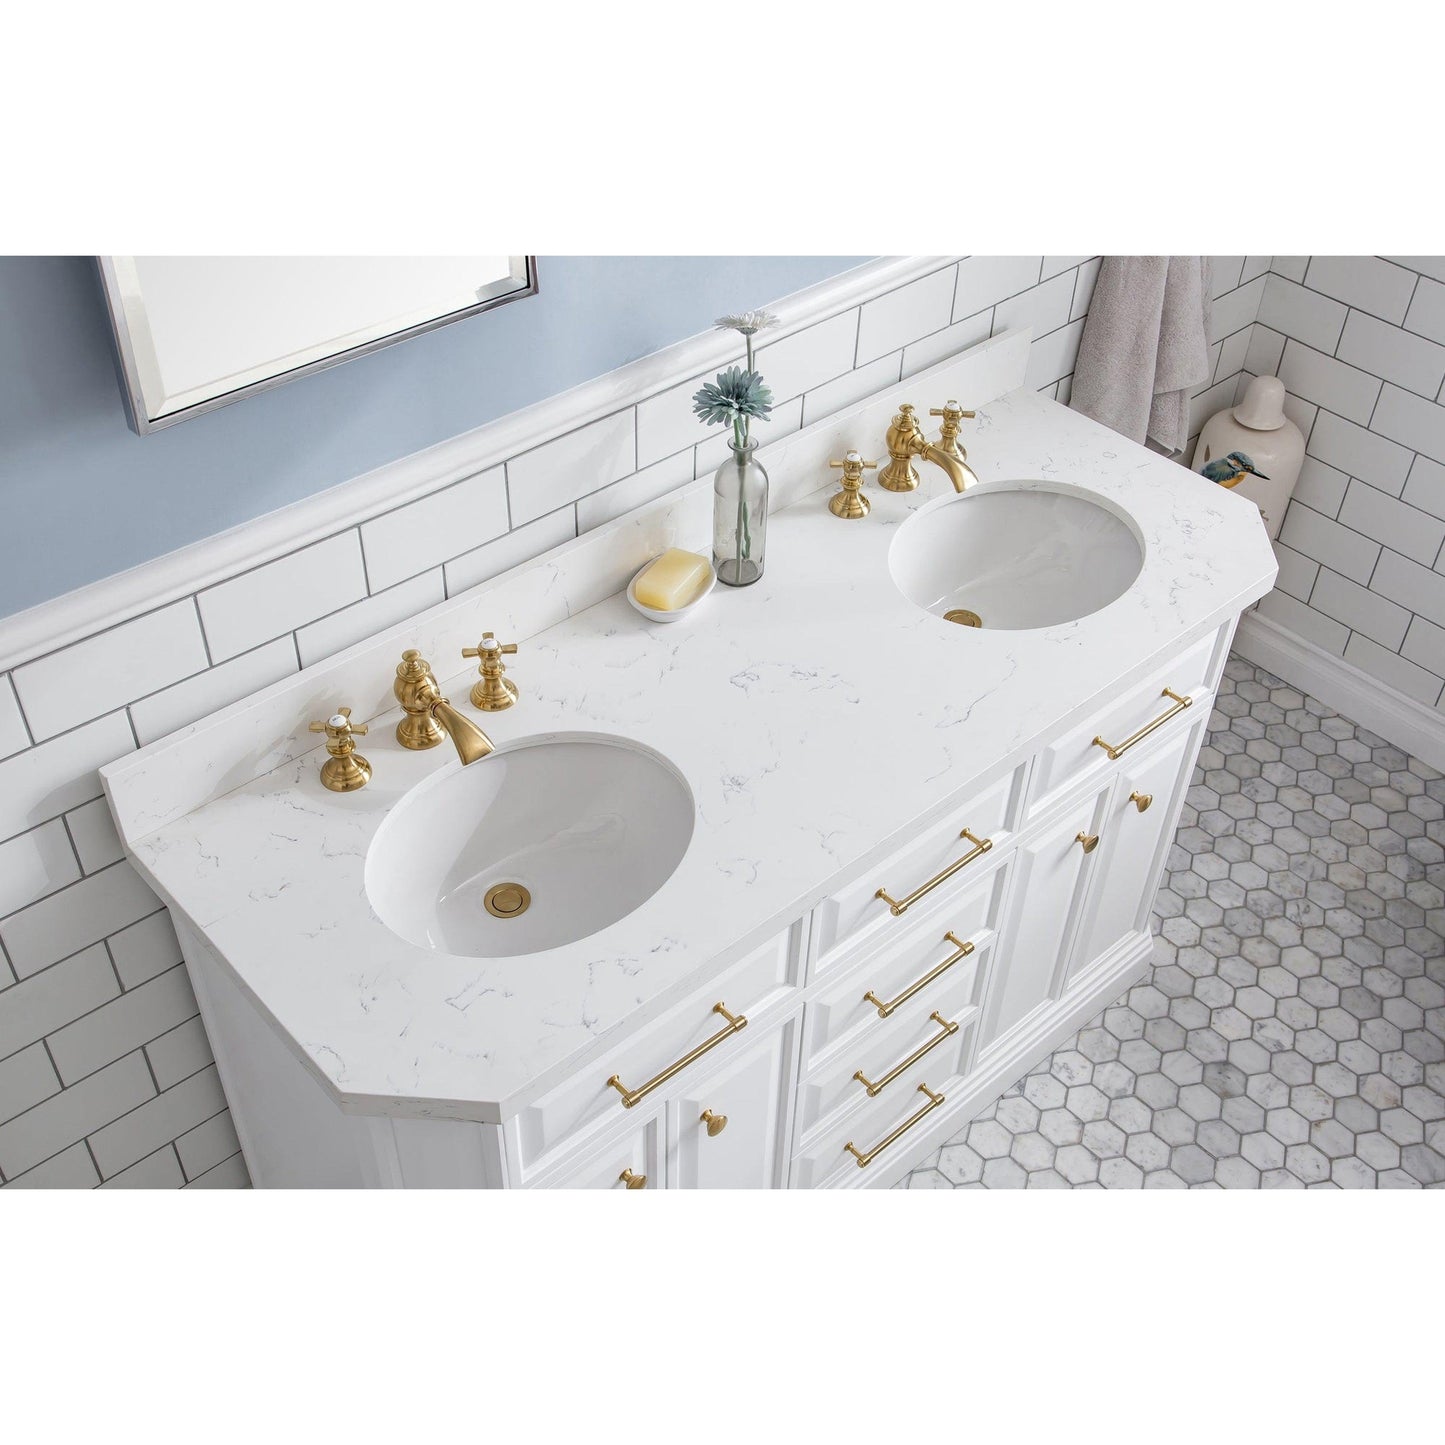 Water Creation Palace 60" Quartz Carrara Pure White Bathroom Vanity Set With Hardware And F2-0013 Faucets in Satin Gold Finish And Mirrors in Chrome Finish